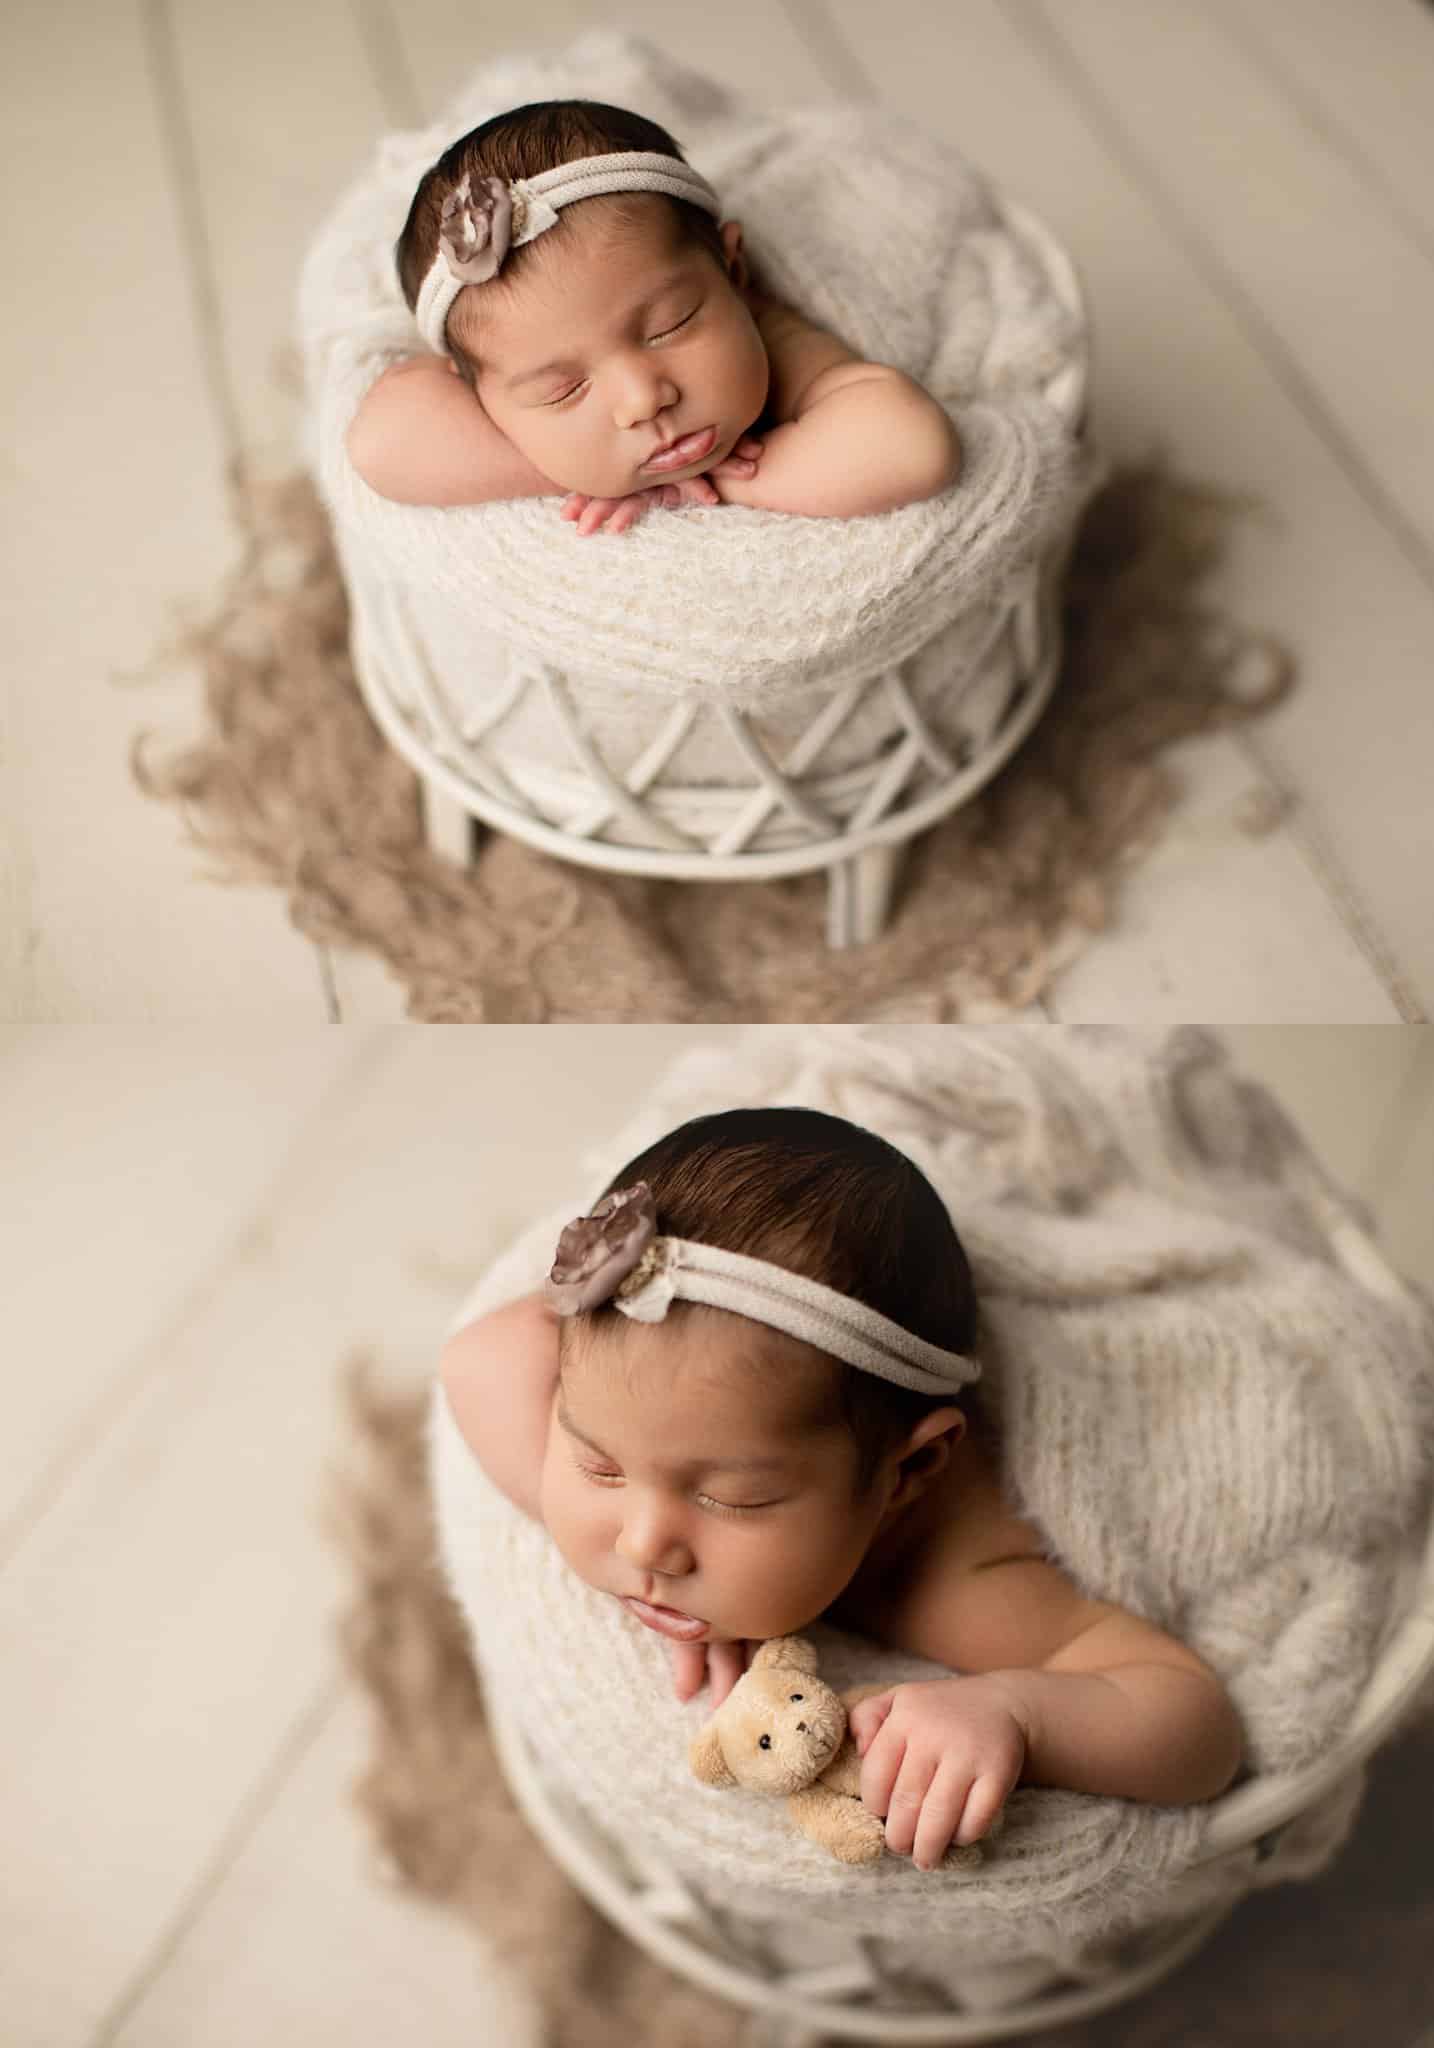 newborn in woven basked on white wood floors